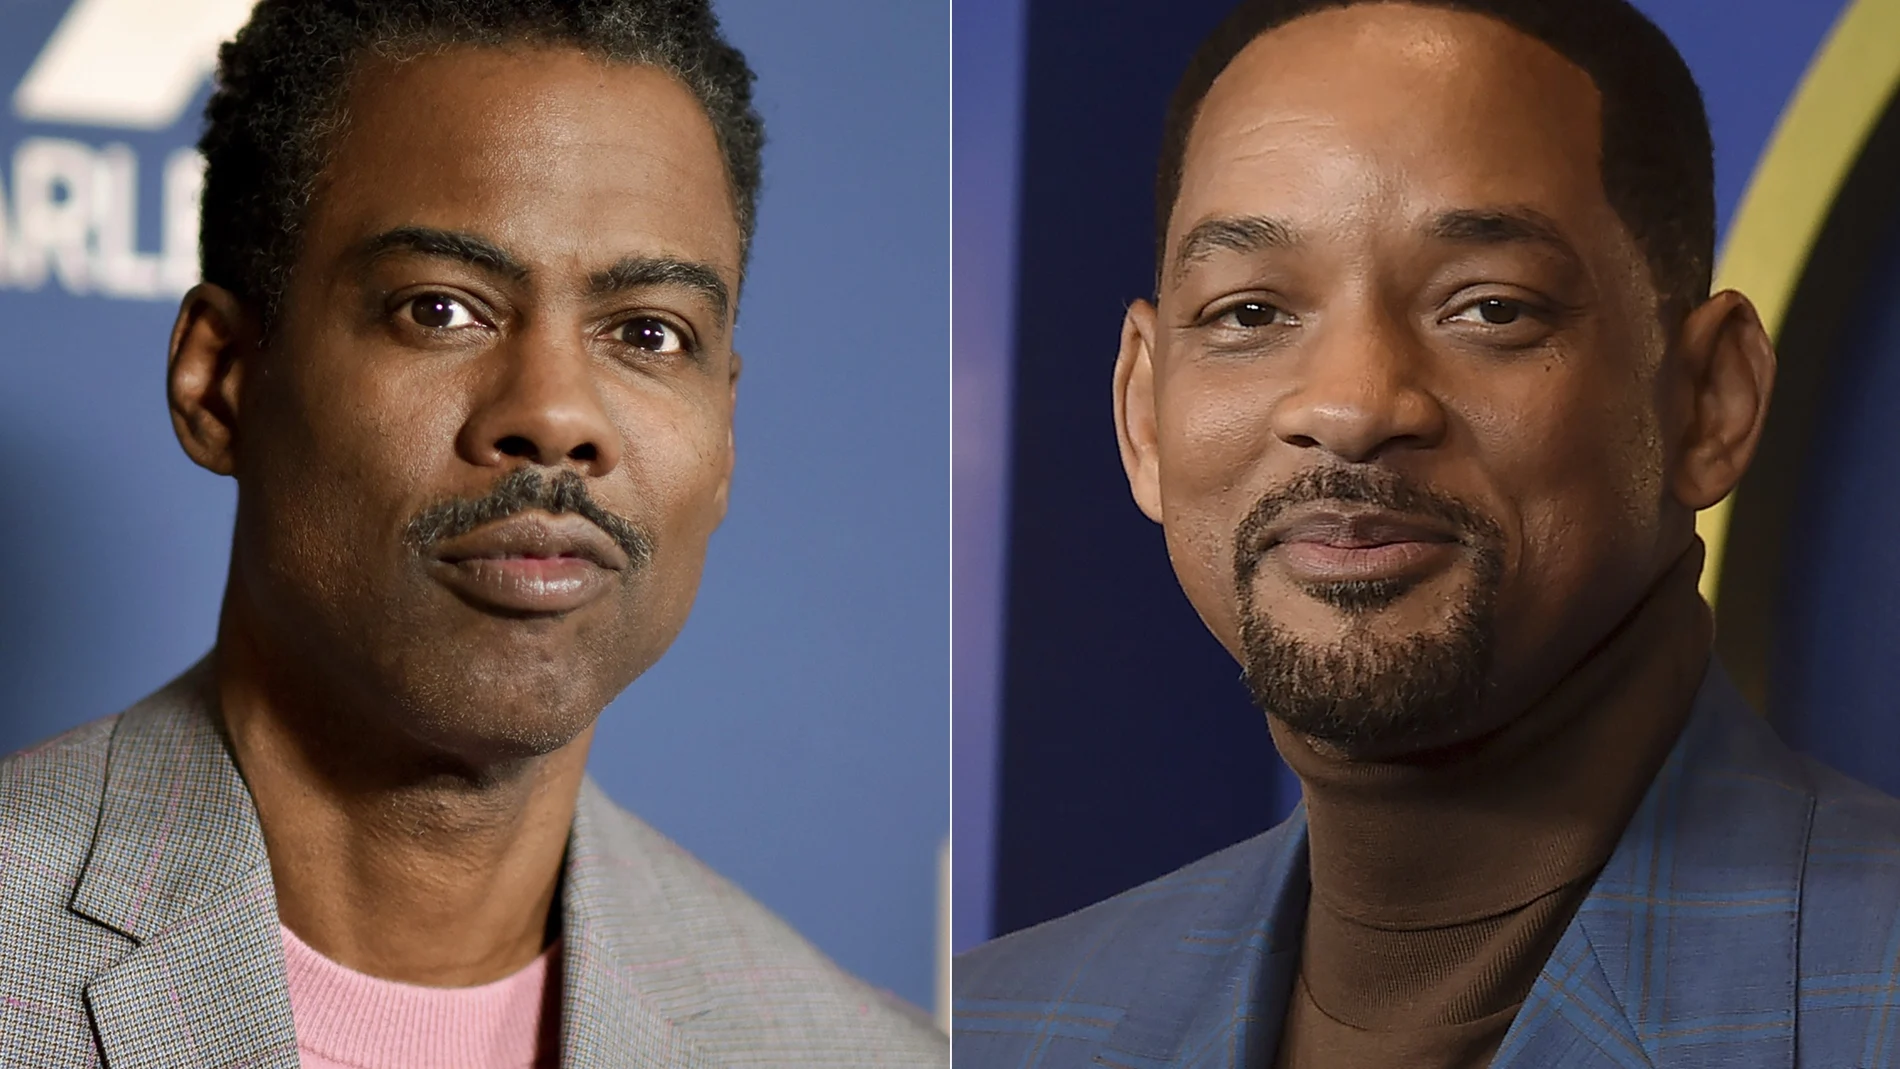 Chris Rock y Will Smith